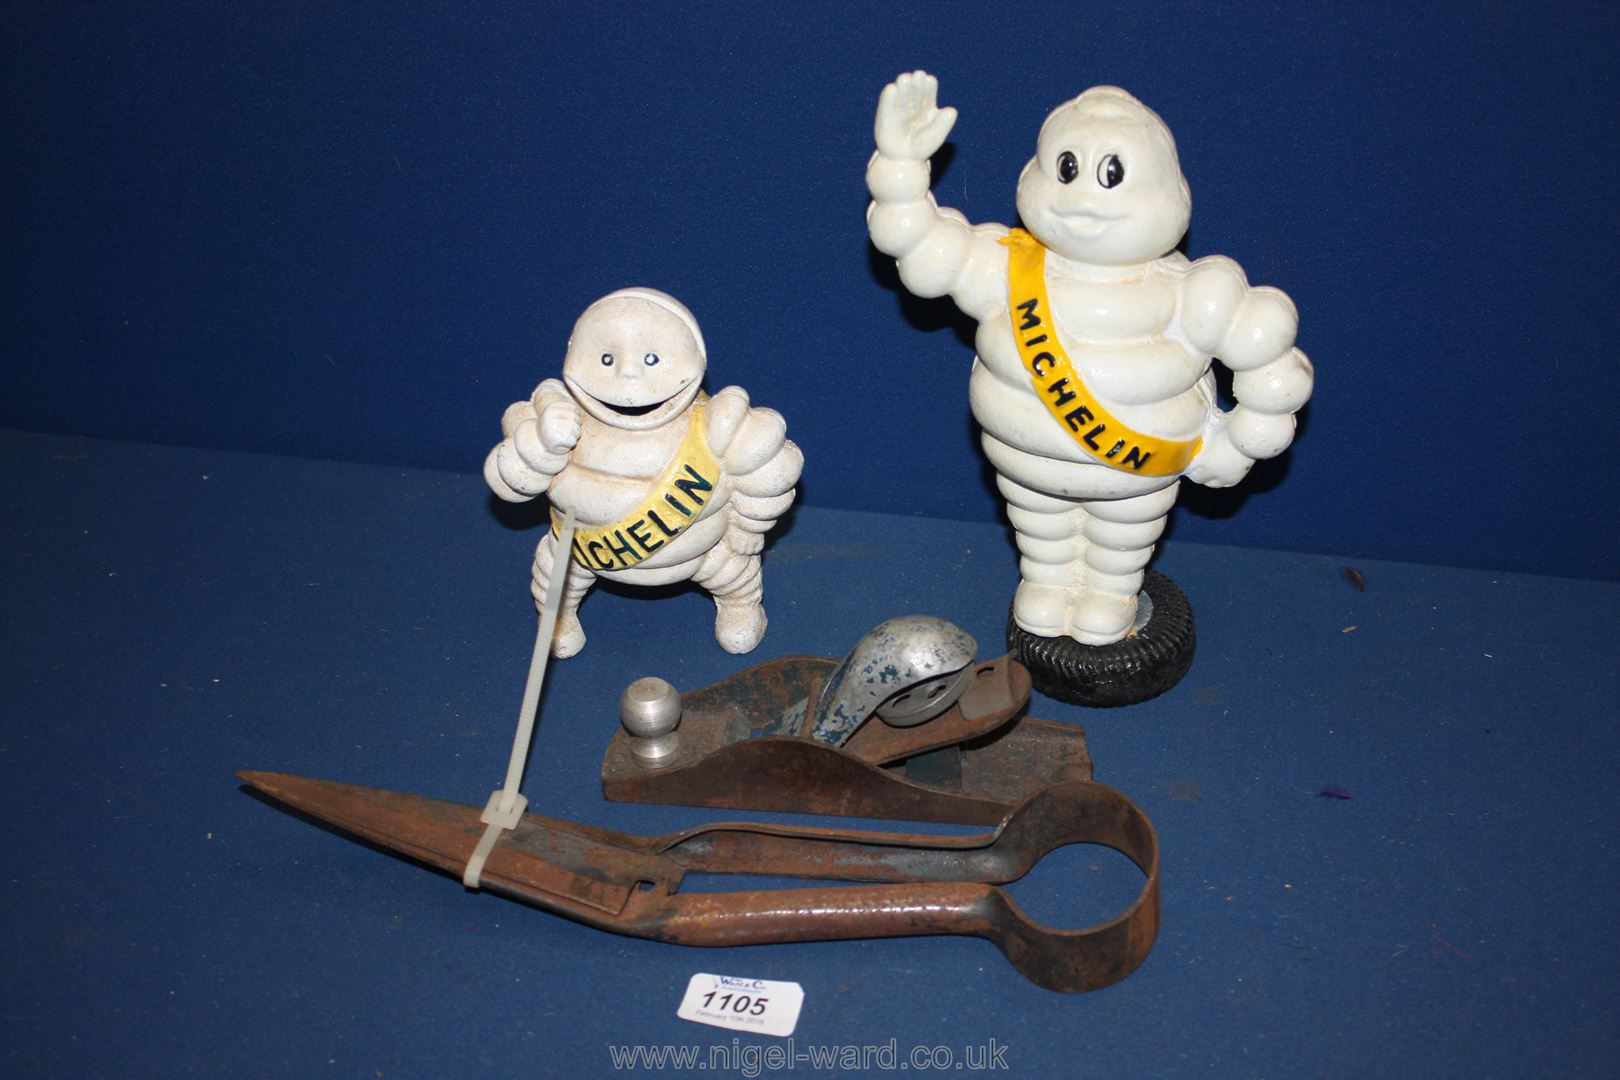 A pair of Dagging Shears, a small 'Guys' wood plane and two 'Michelin' men.